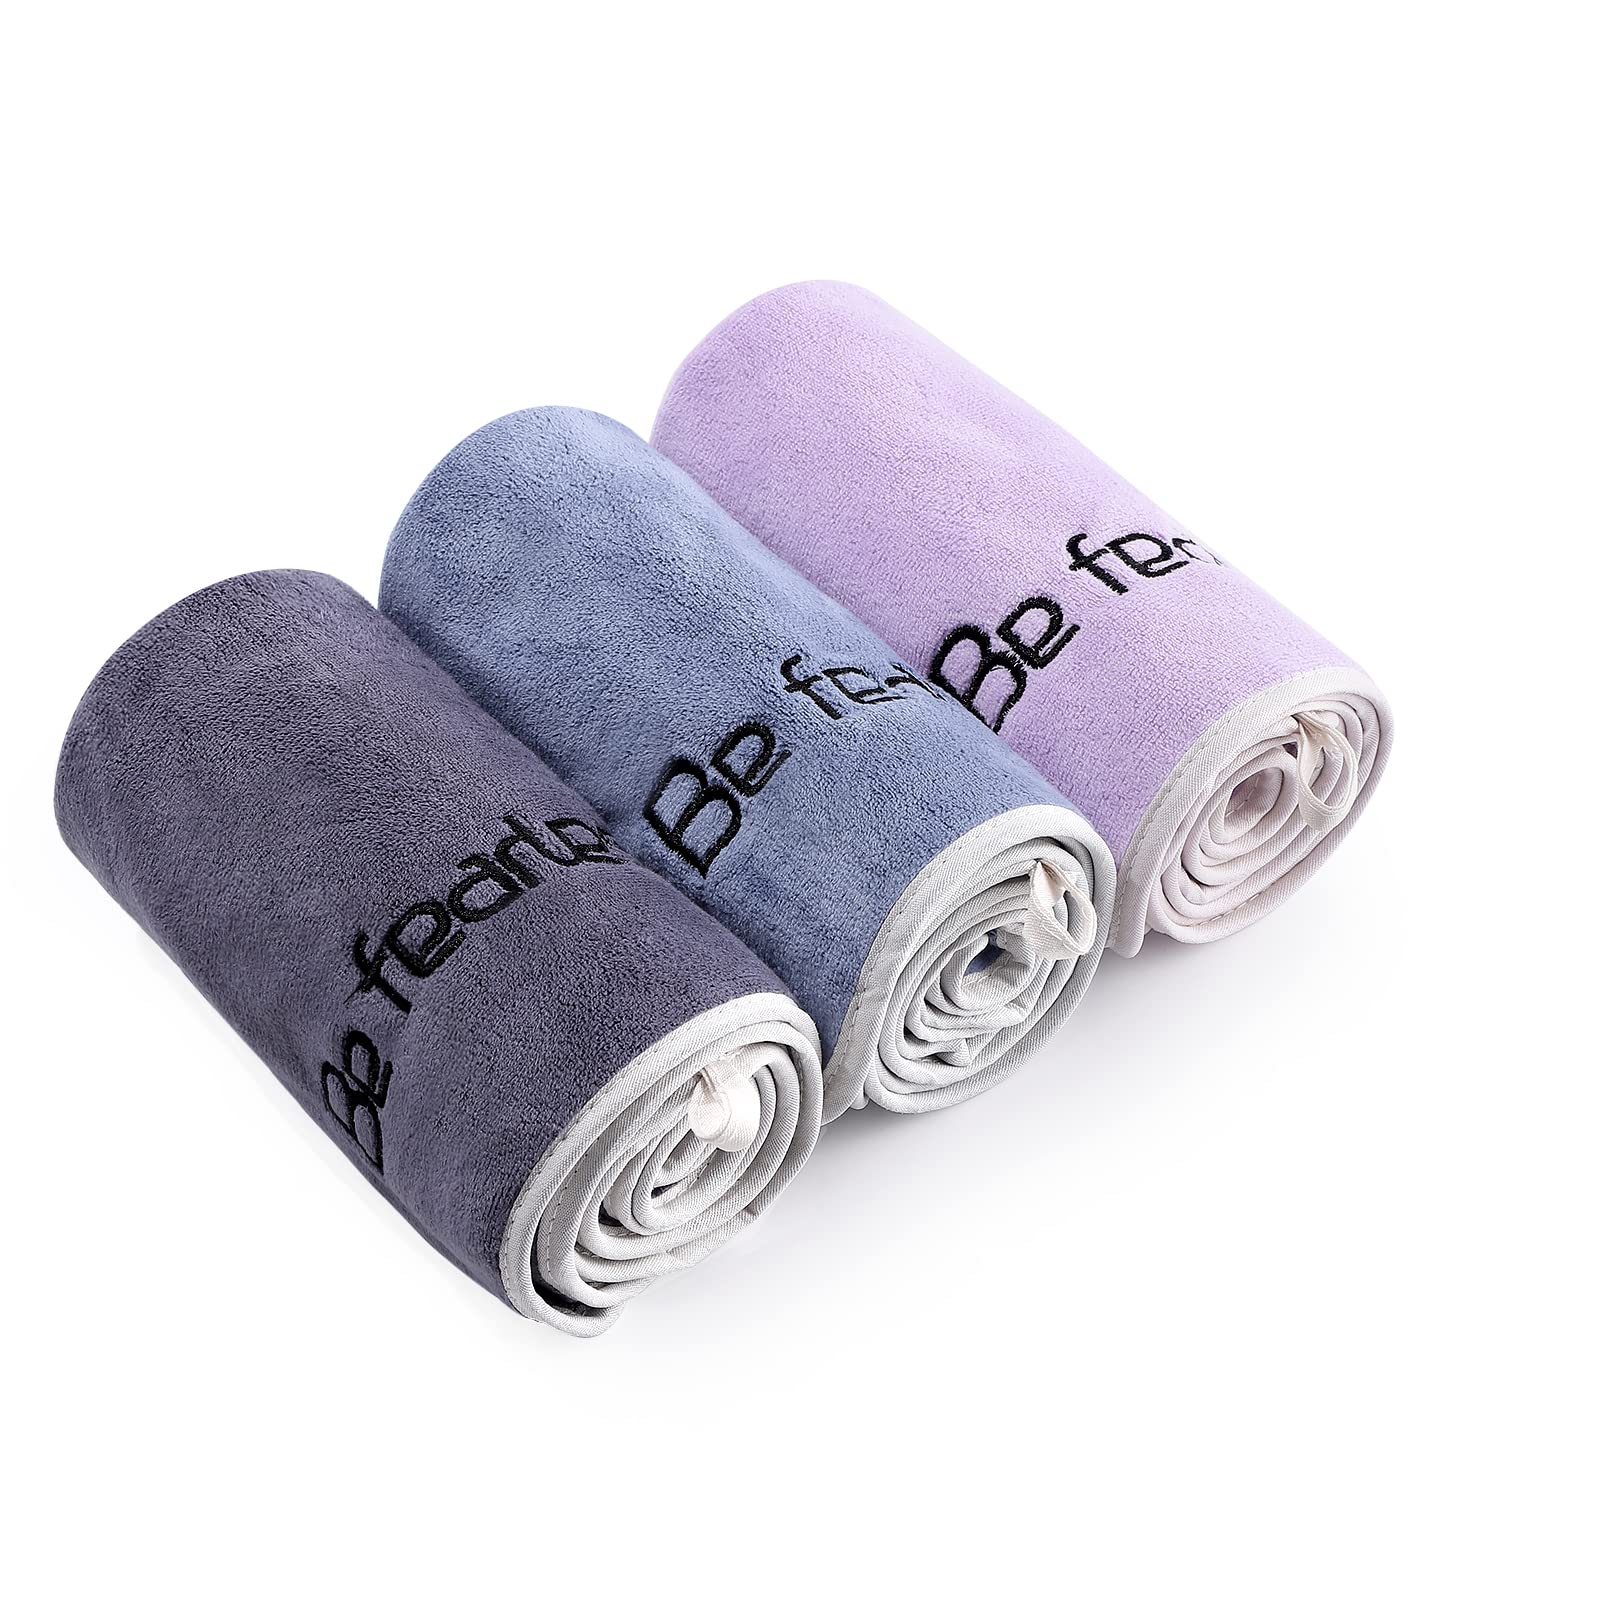 BOBOR Gym Towels Set, Microfiber Sports Towel for Men and Women, Super Soft  and Quick-Drying 3-Pack Set Towel, for Tennis, Yoga, Cycling, Swimming  (1Blue+1Purple+1Gray, 14 x 29) 1blue+1purple+1gray 14 x 29